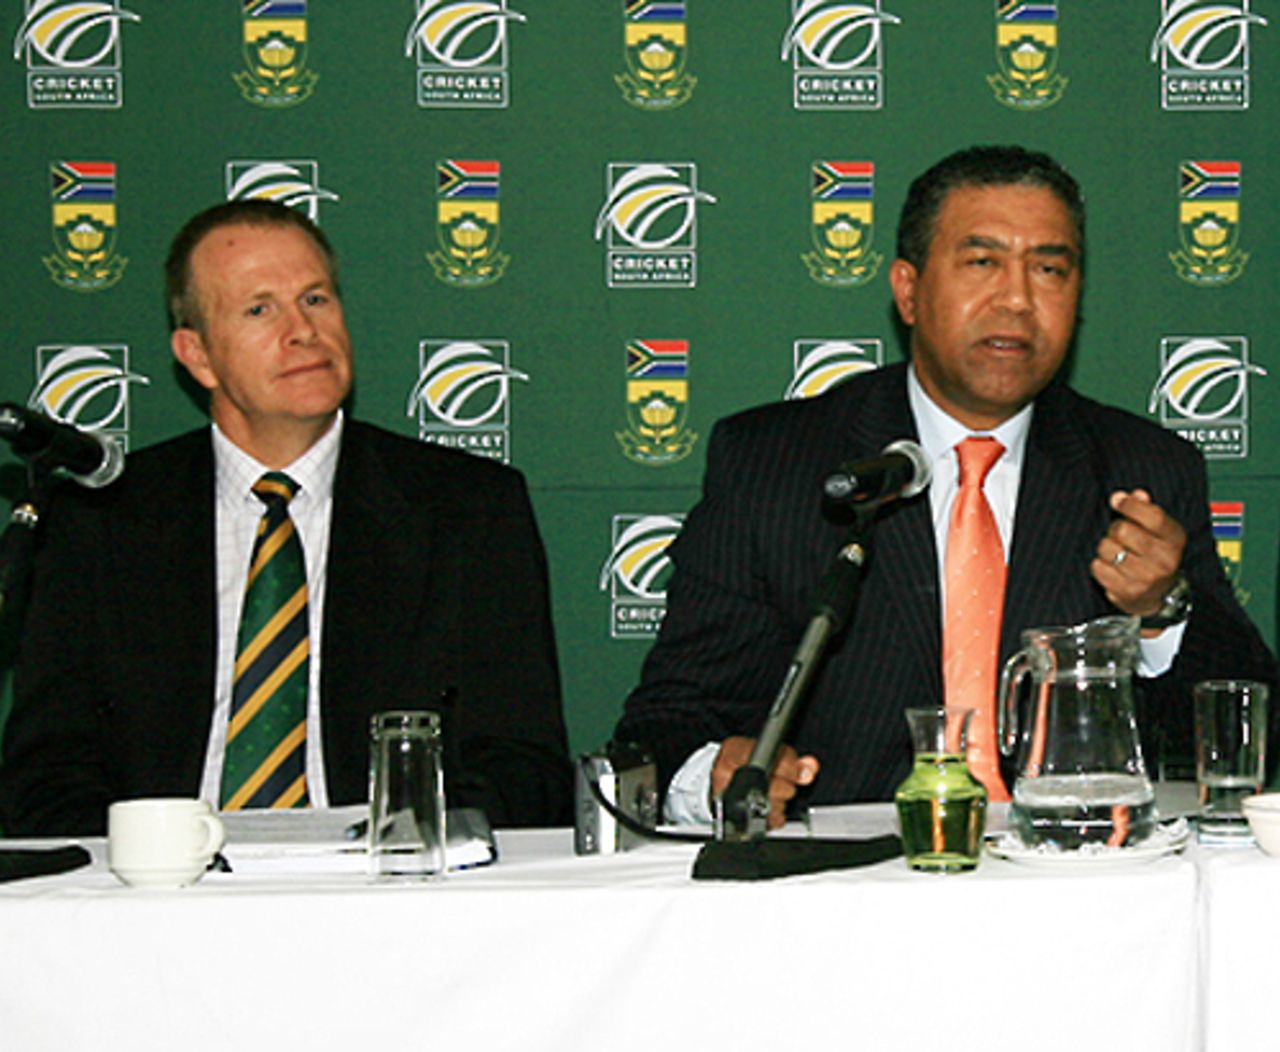 Tony Irish, the CEO of the South African Cricketers' Association and Norman Arendse, the president of Criket South Africa, at a press conference to announce a new business model, Johannesburg, July 25, 2007